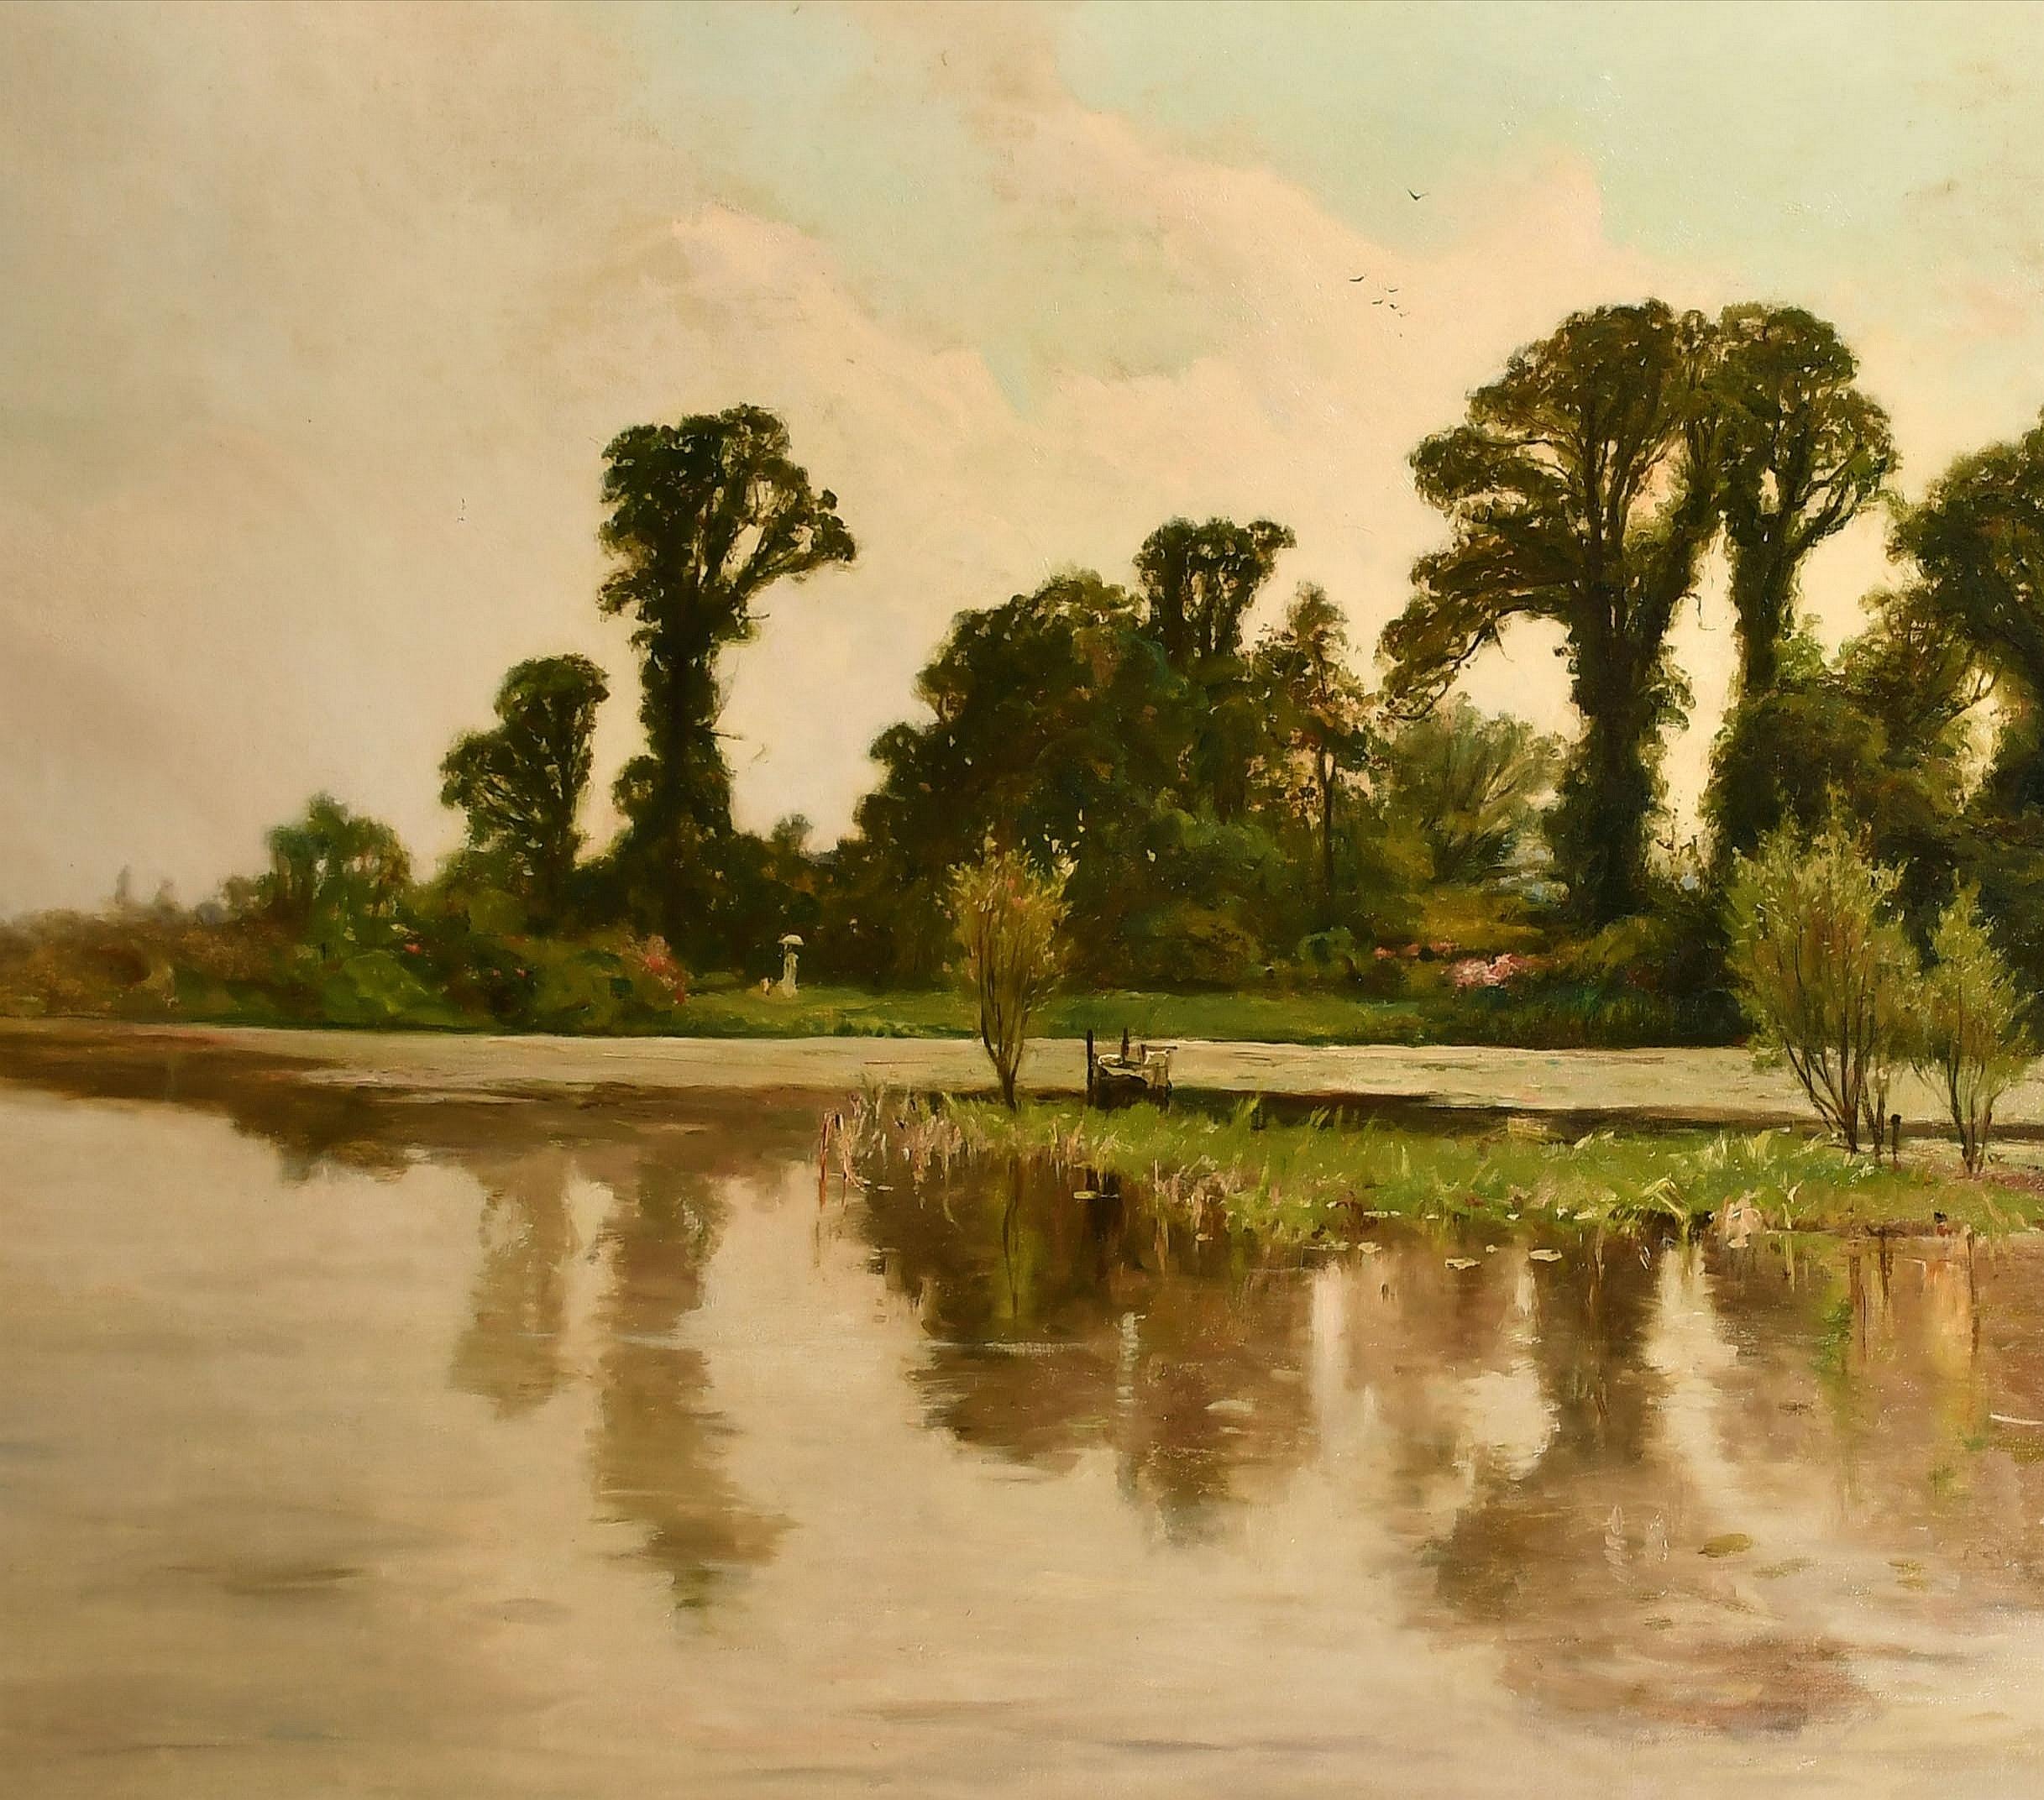 A huge signed and dated 1889 oil on canvas impressionist tranquil river landscape by Scottish Academy artist George Aikman. 

Excellent quality exhibition scale work depicting the edge of a river with large trees reflecting in the water and a lady